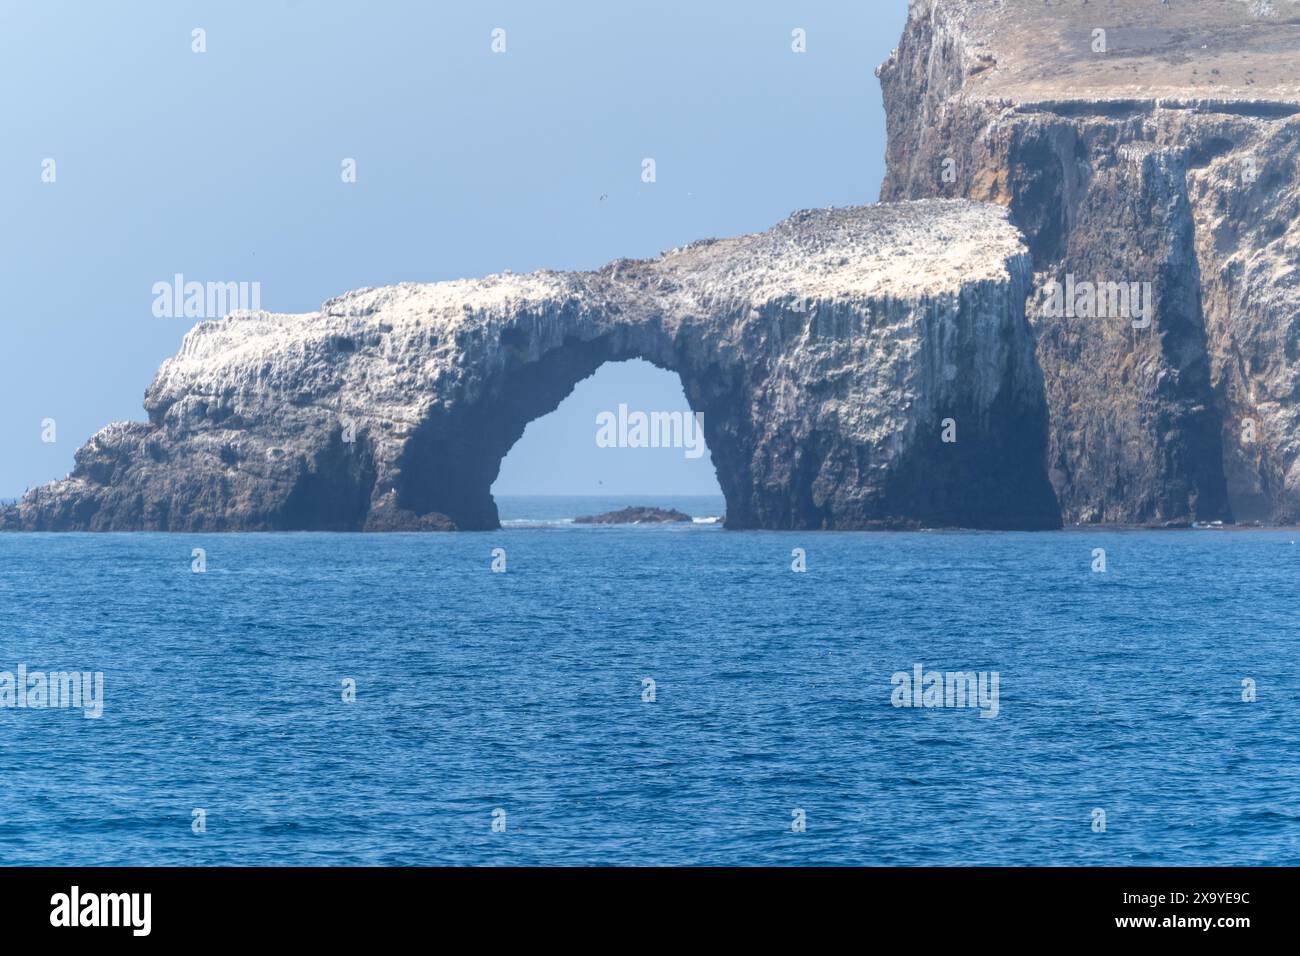 The Stone Arch at Channel Islands National Park, CA, USA Stock Photo